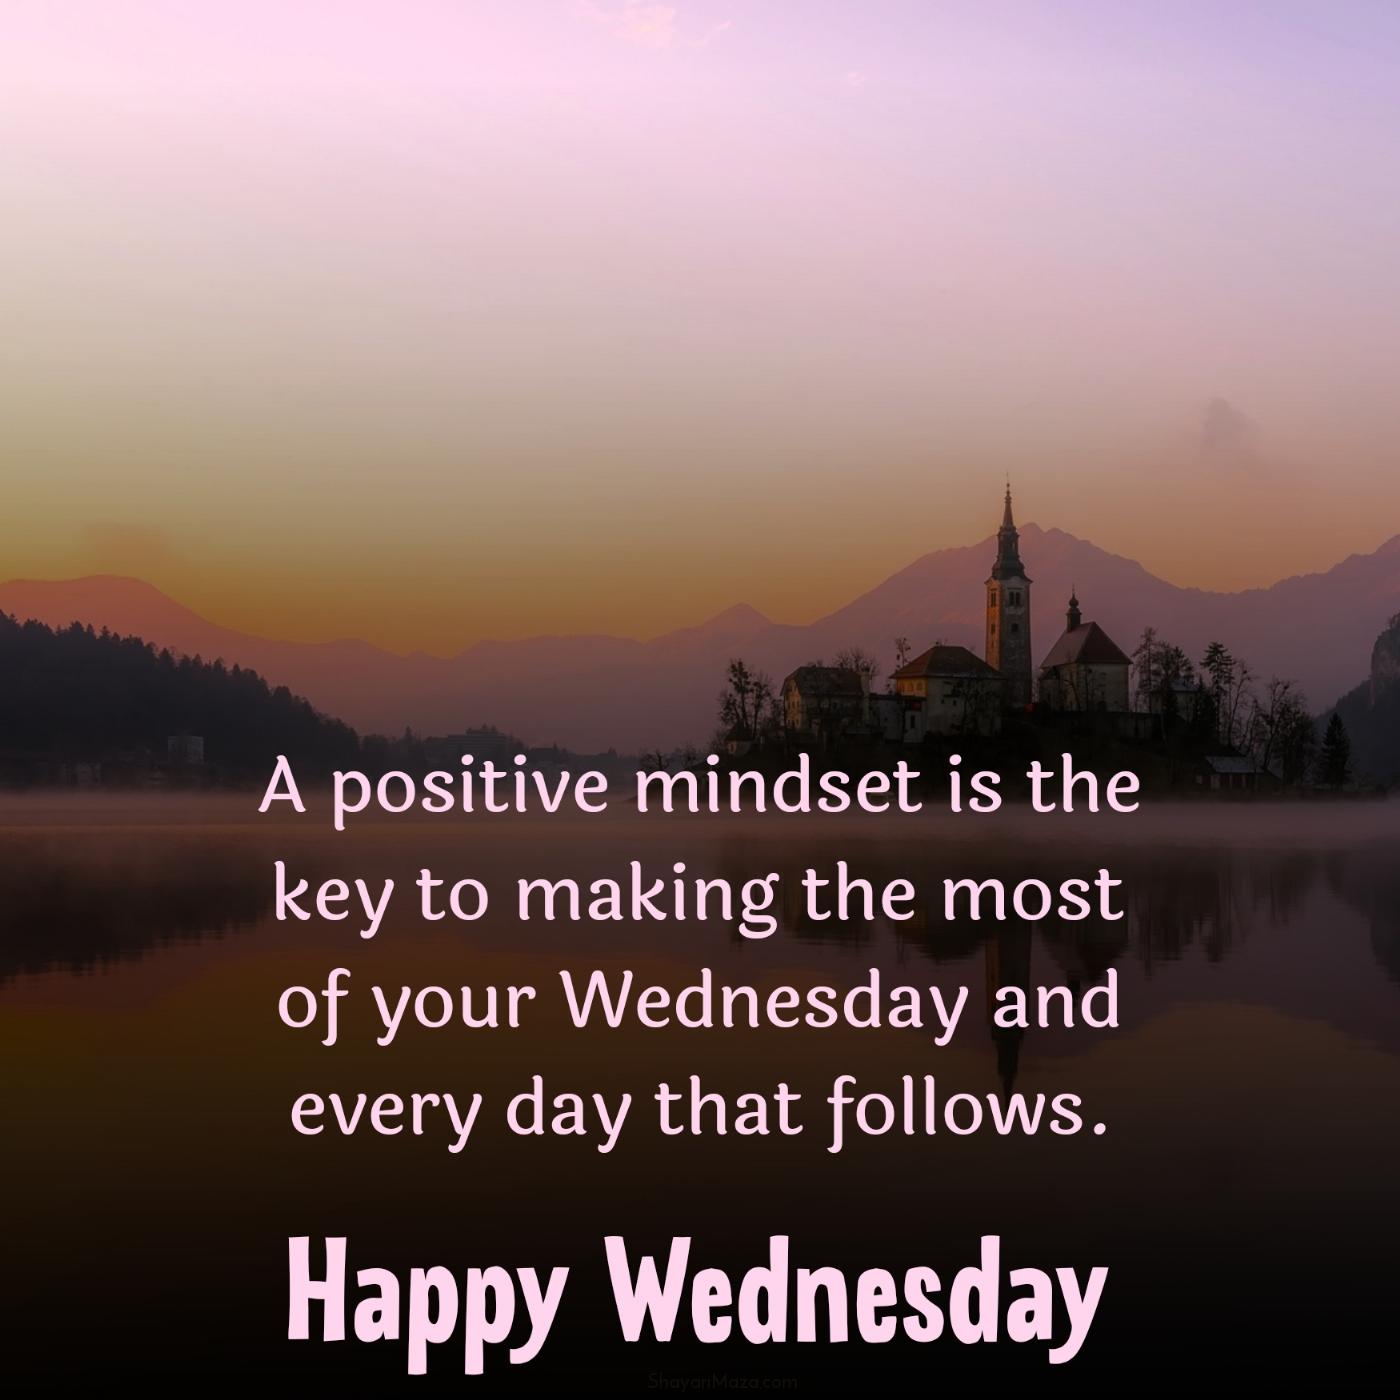 A positive mindset is the key to making the most of your Wednesday